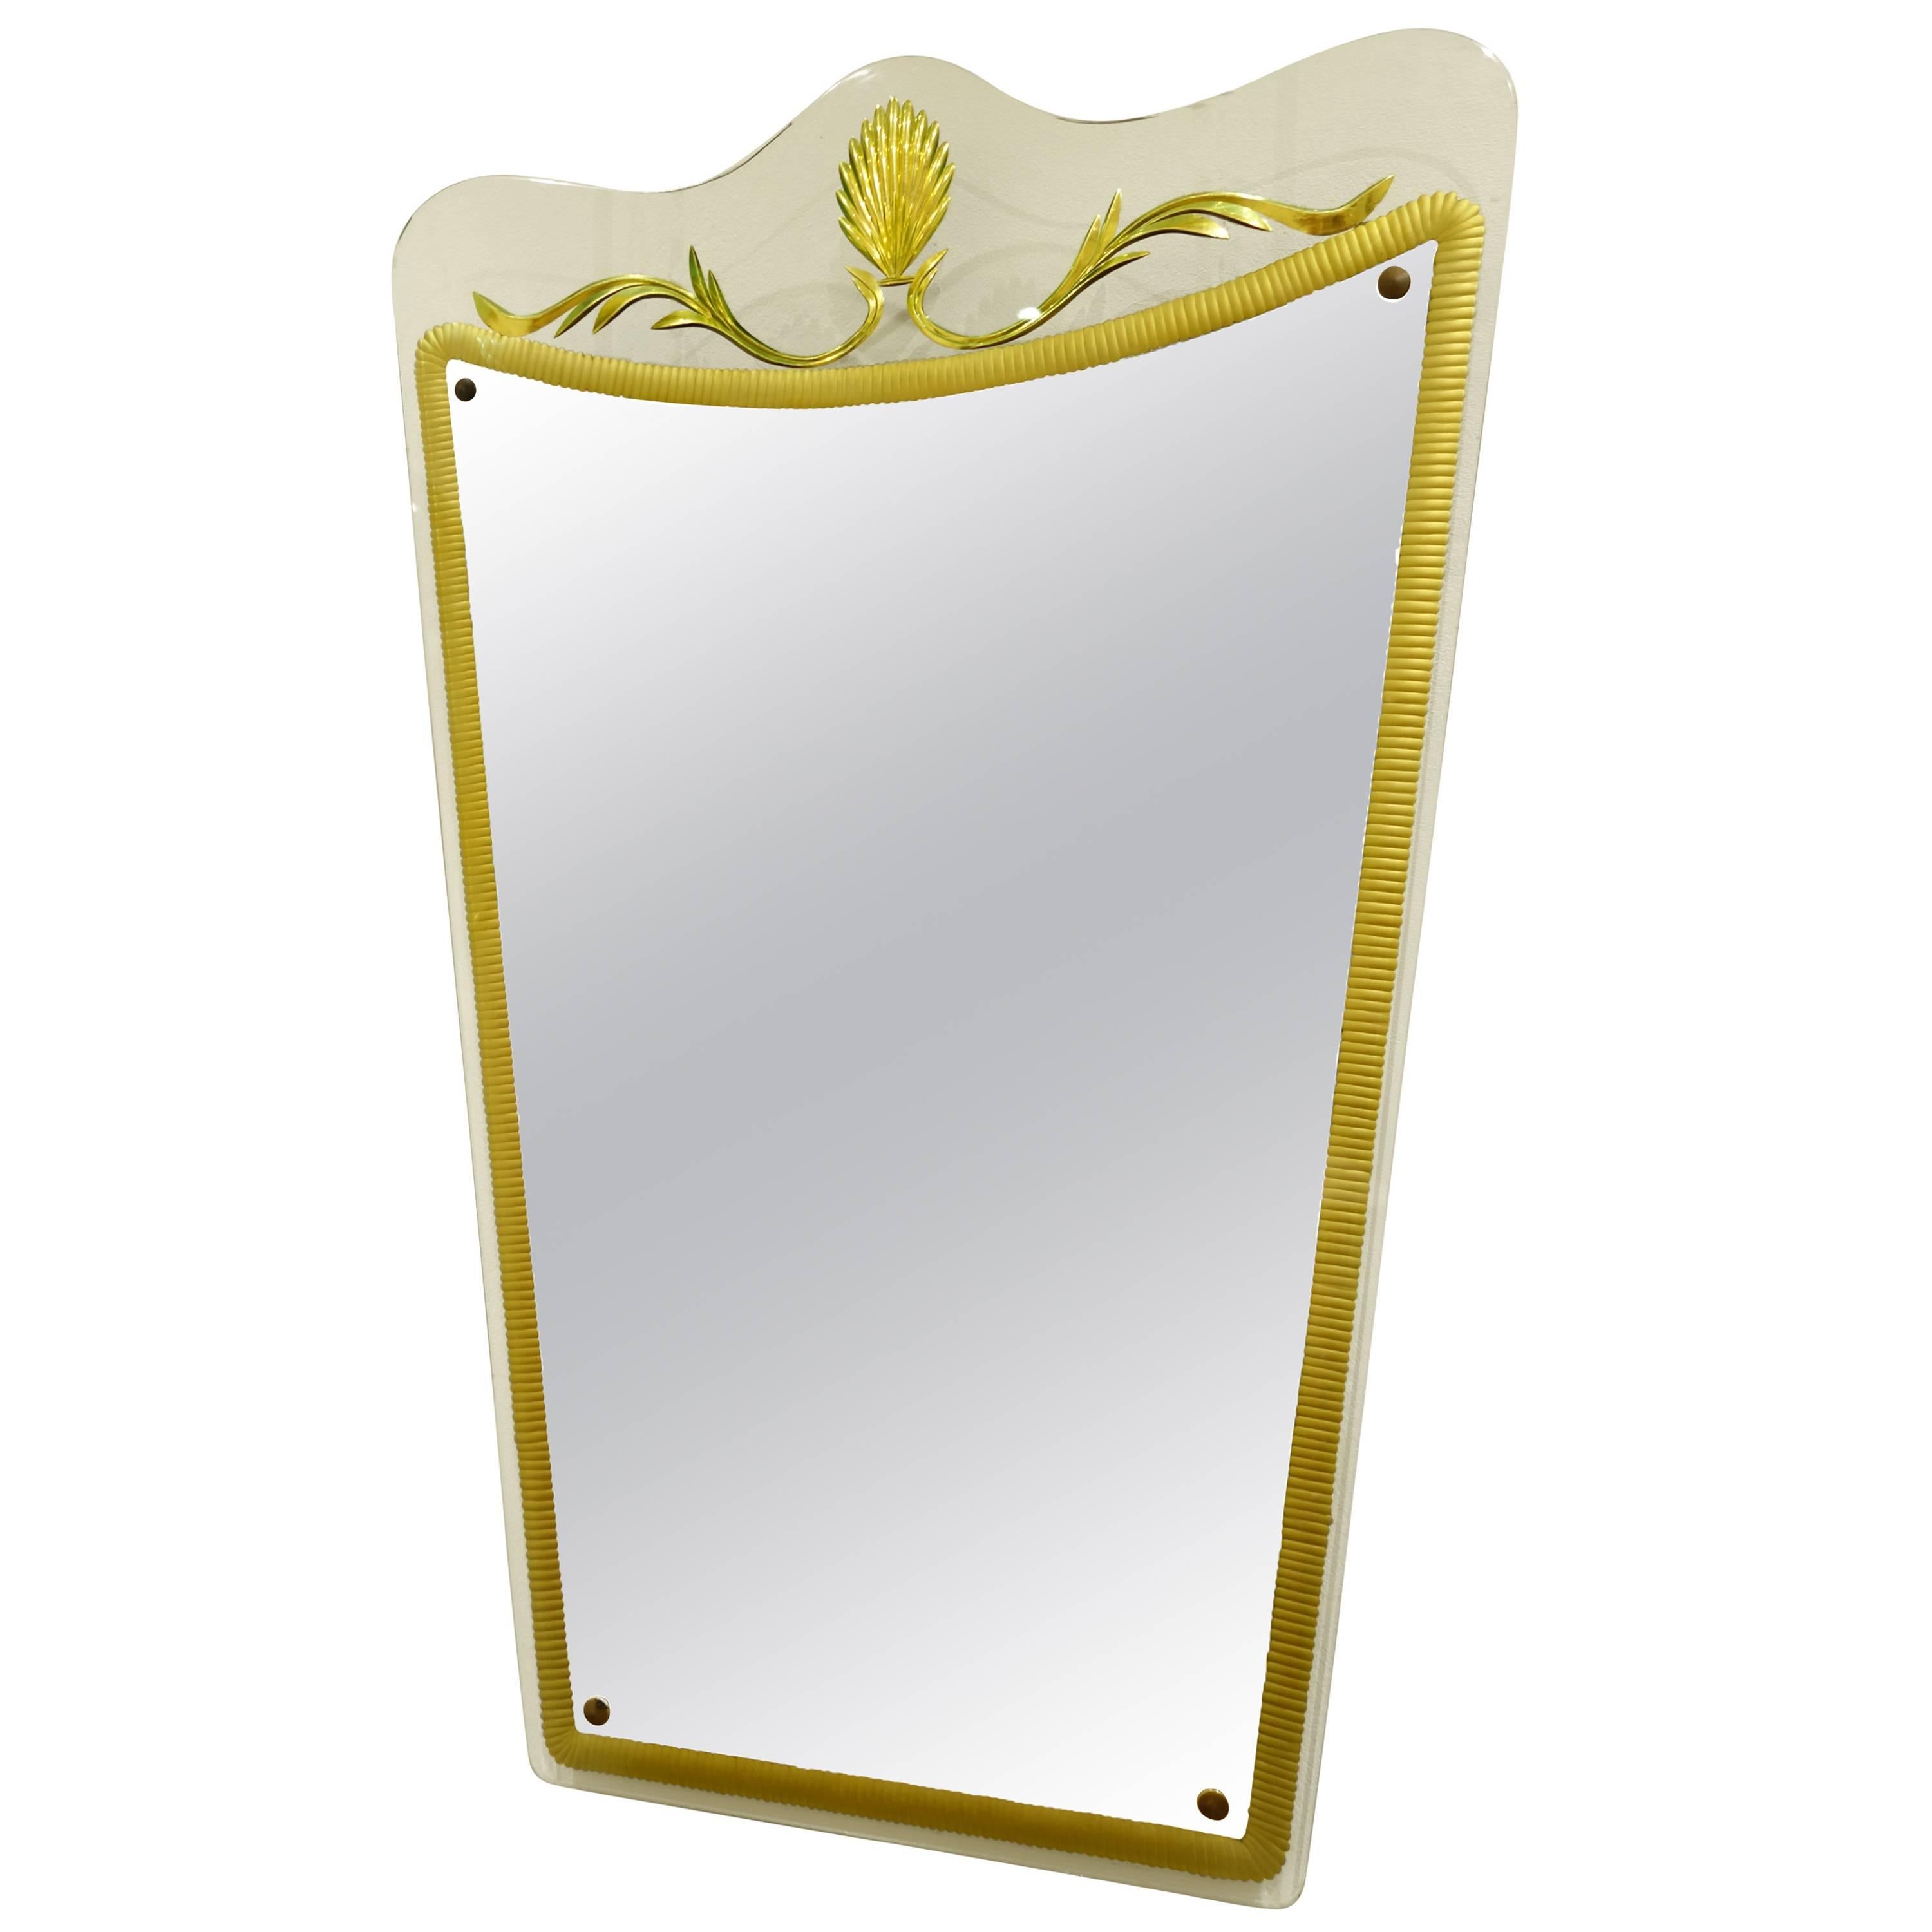 Cristal Art Mirror with Yellow Engraved Decoration, circa 1948 For Sale